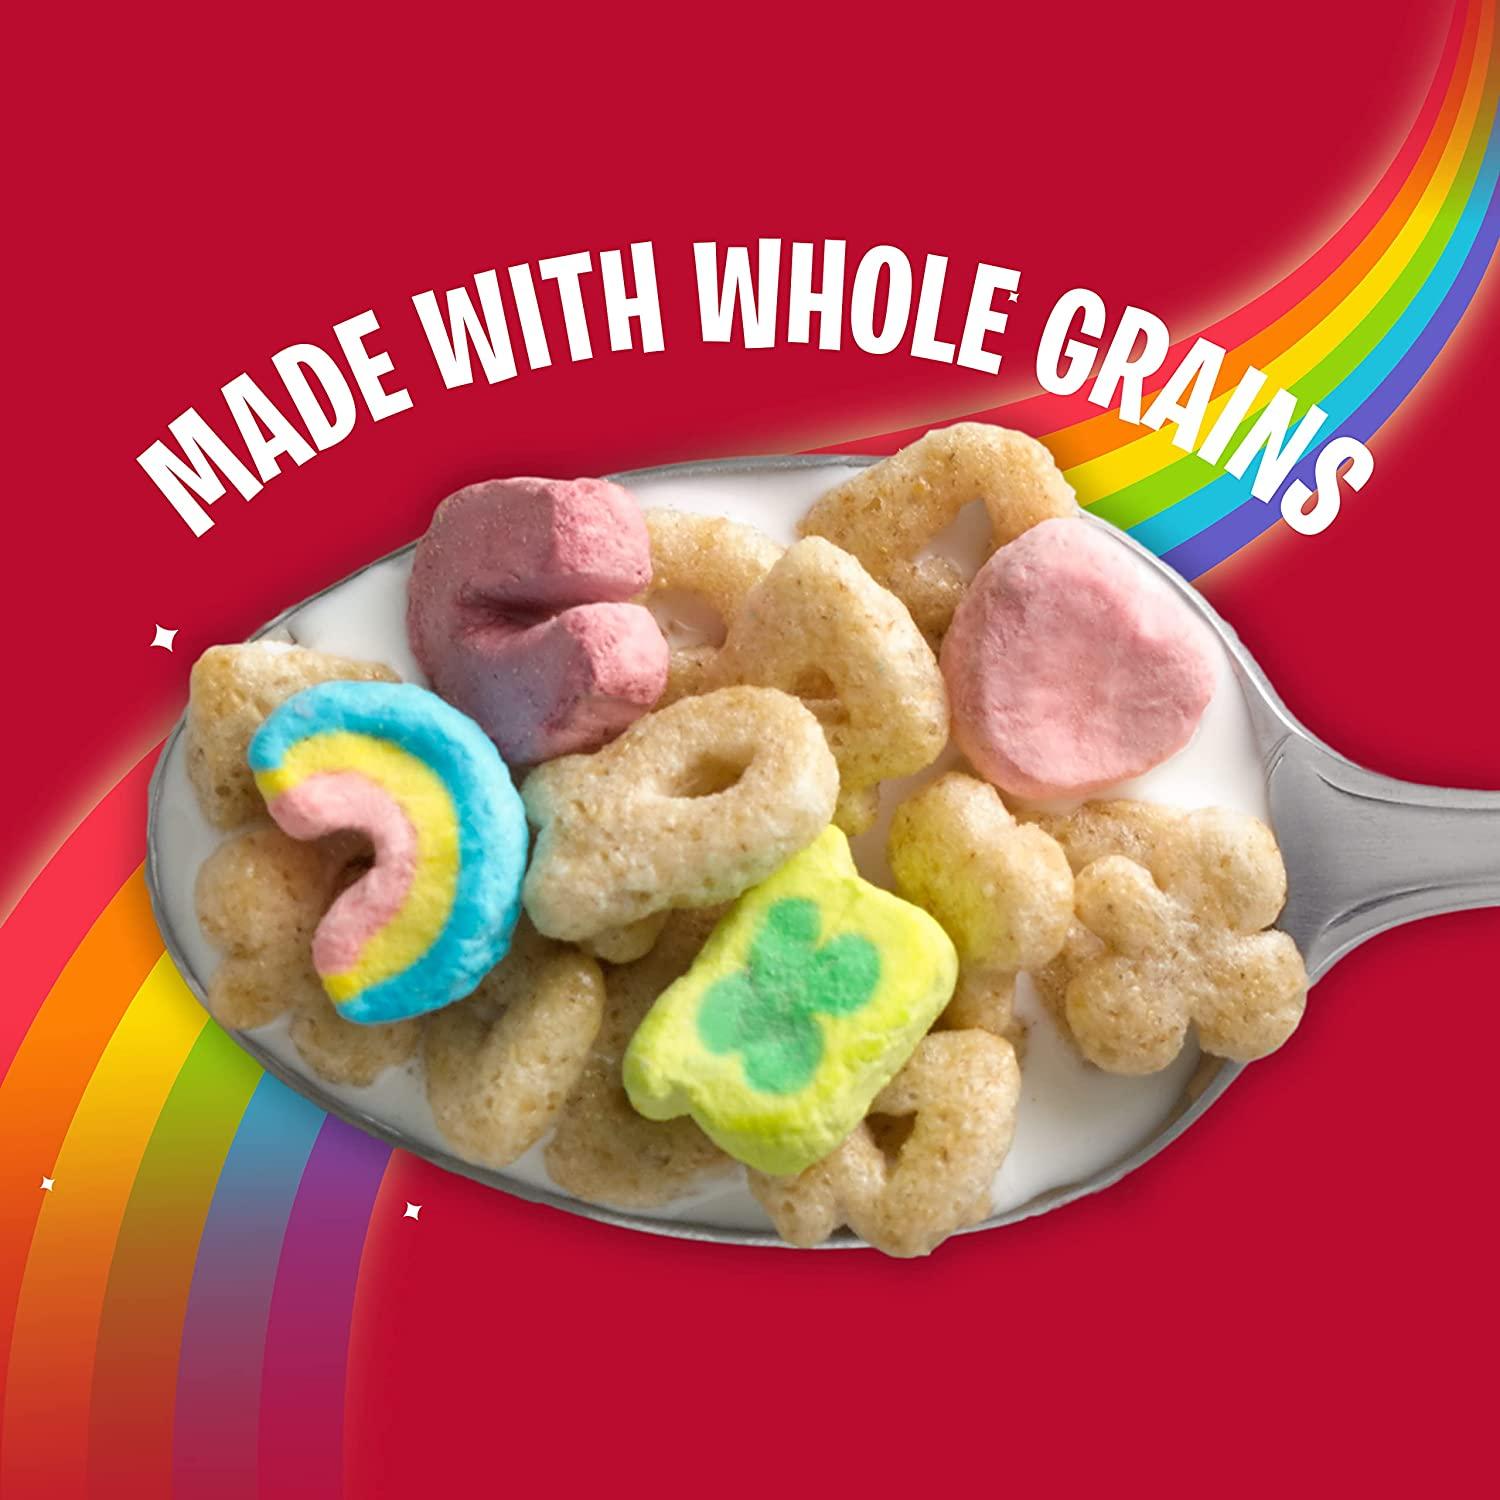 Lucky Charms Cereal - 10.5 oz